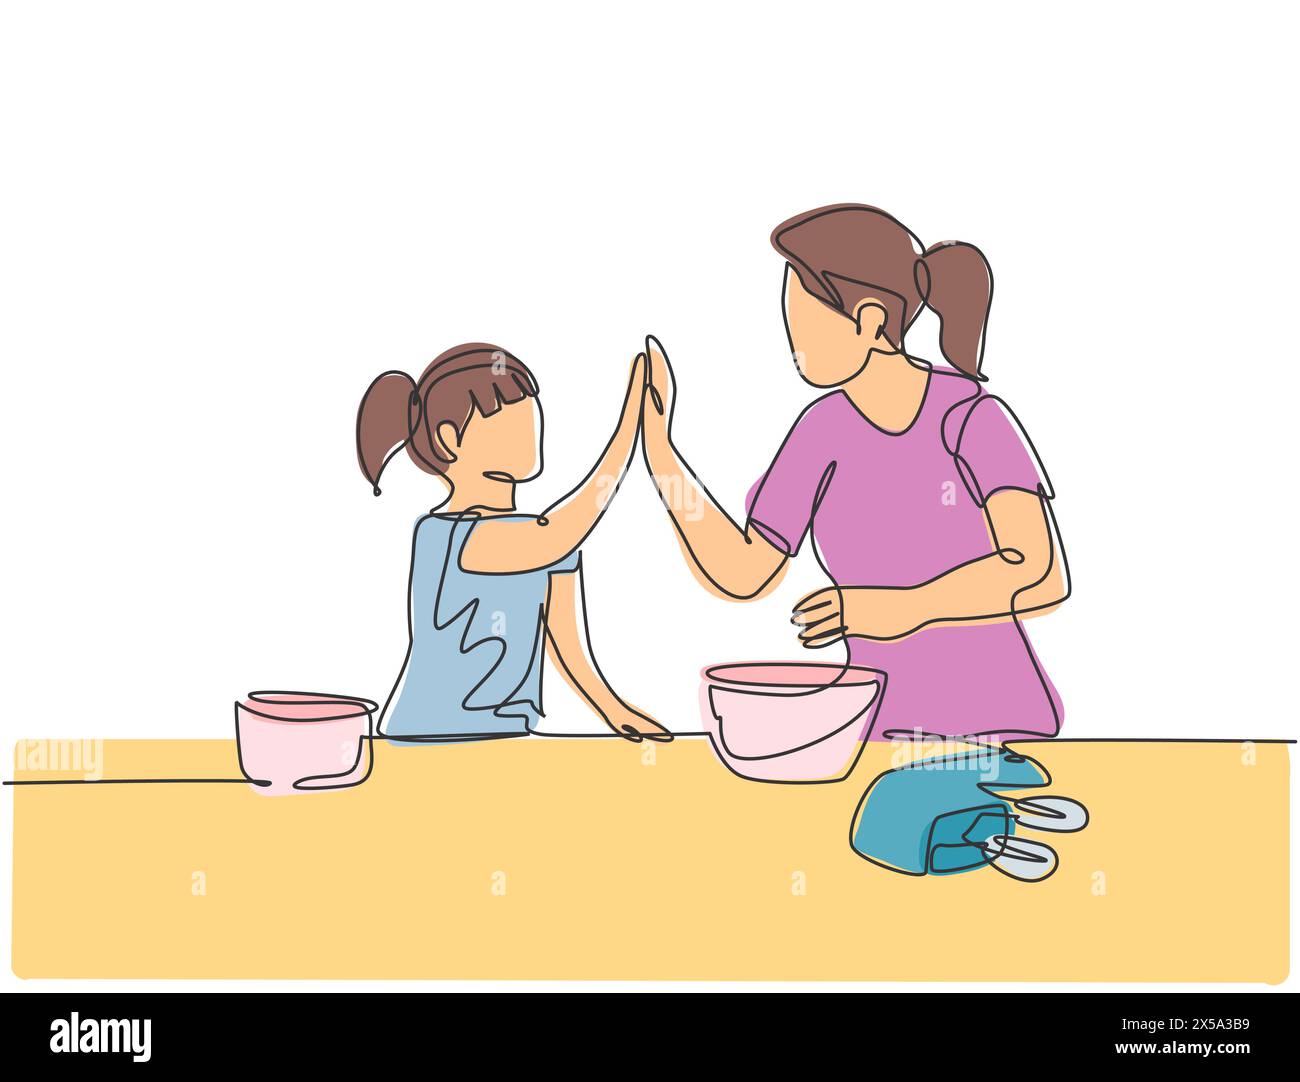 Single line drawing of mother and daughter preparing to cook some cookies at the kitchen and giving high five gesture. Parenting concept continuous li Stock Vector